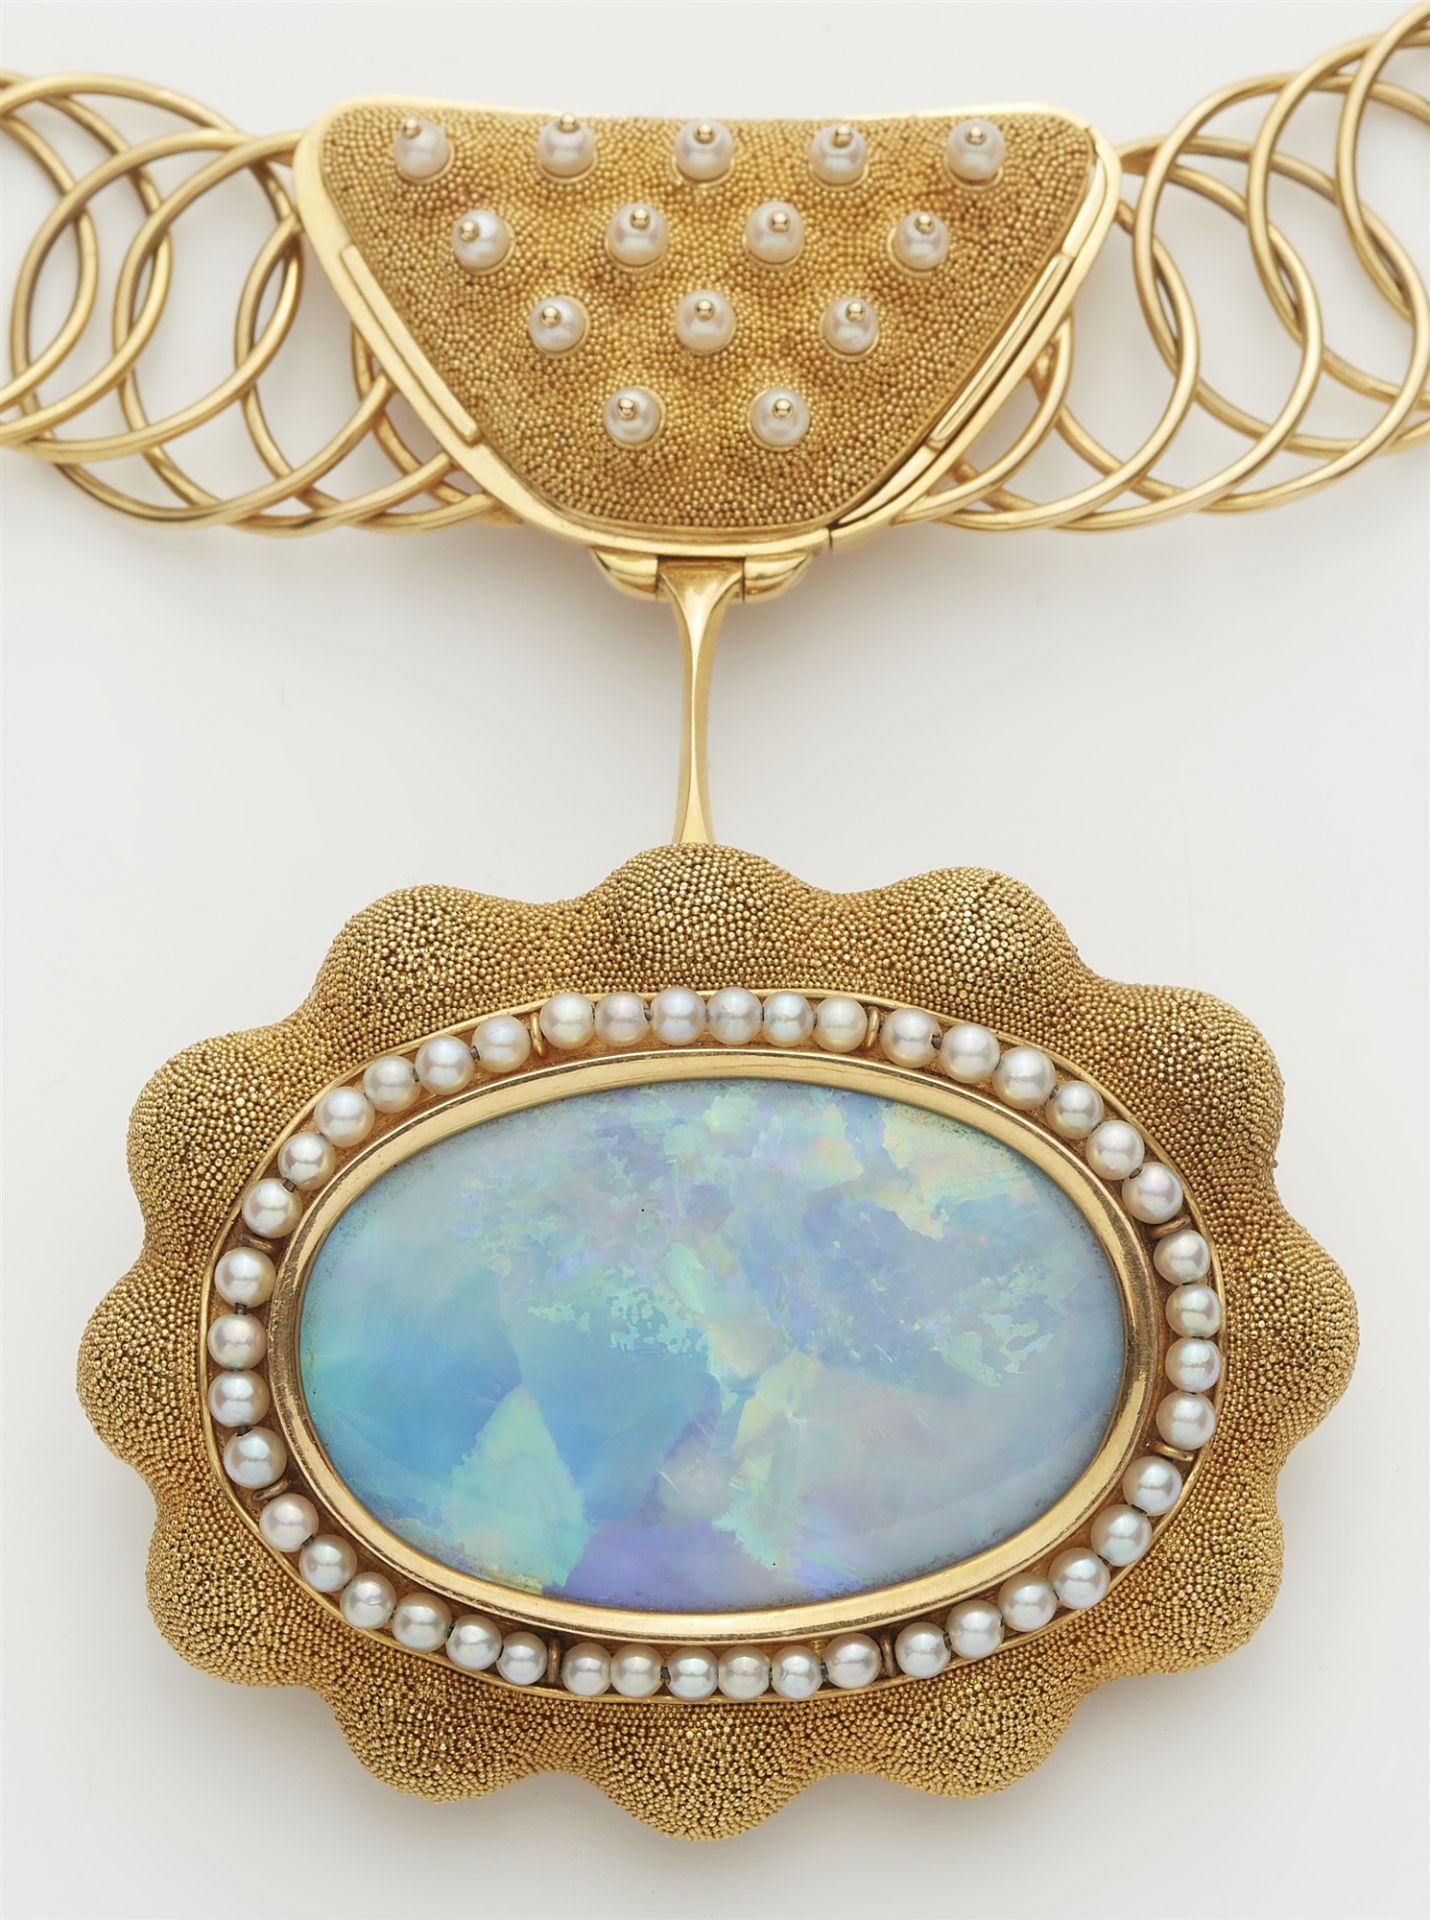 A German hand-forged 18k gold wire necklace with a large granulation and black opal pendant brooch. - Image 2 of 3